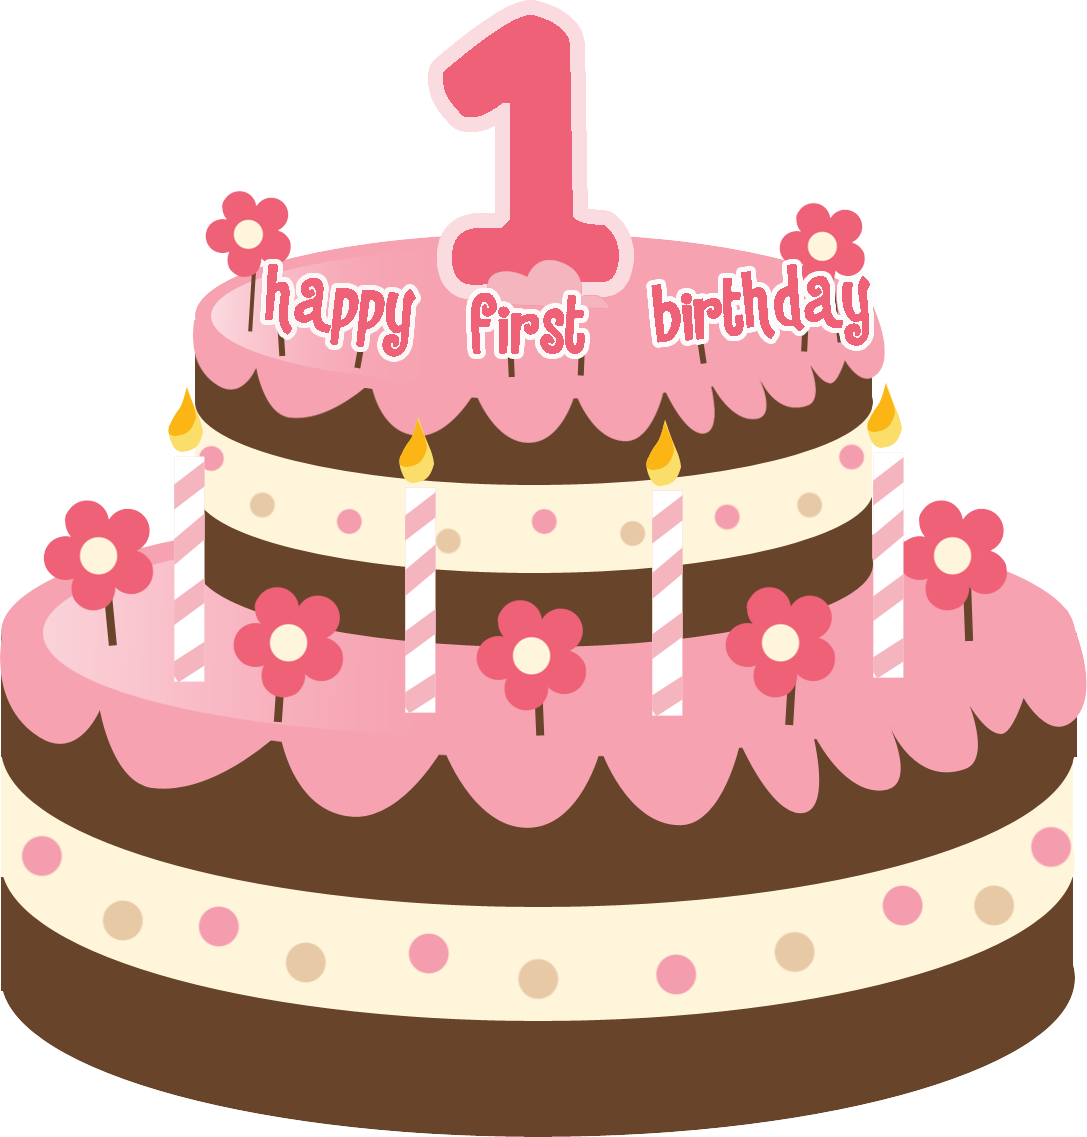 Birthday Cake Clip Art Png   Clipart Panda   Free Clipart Images